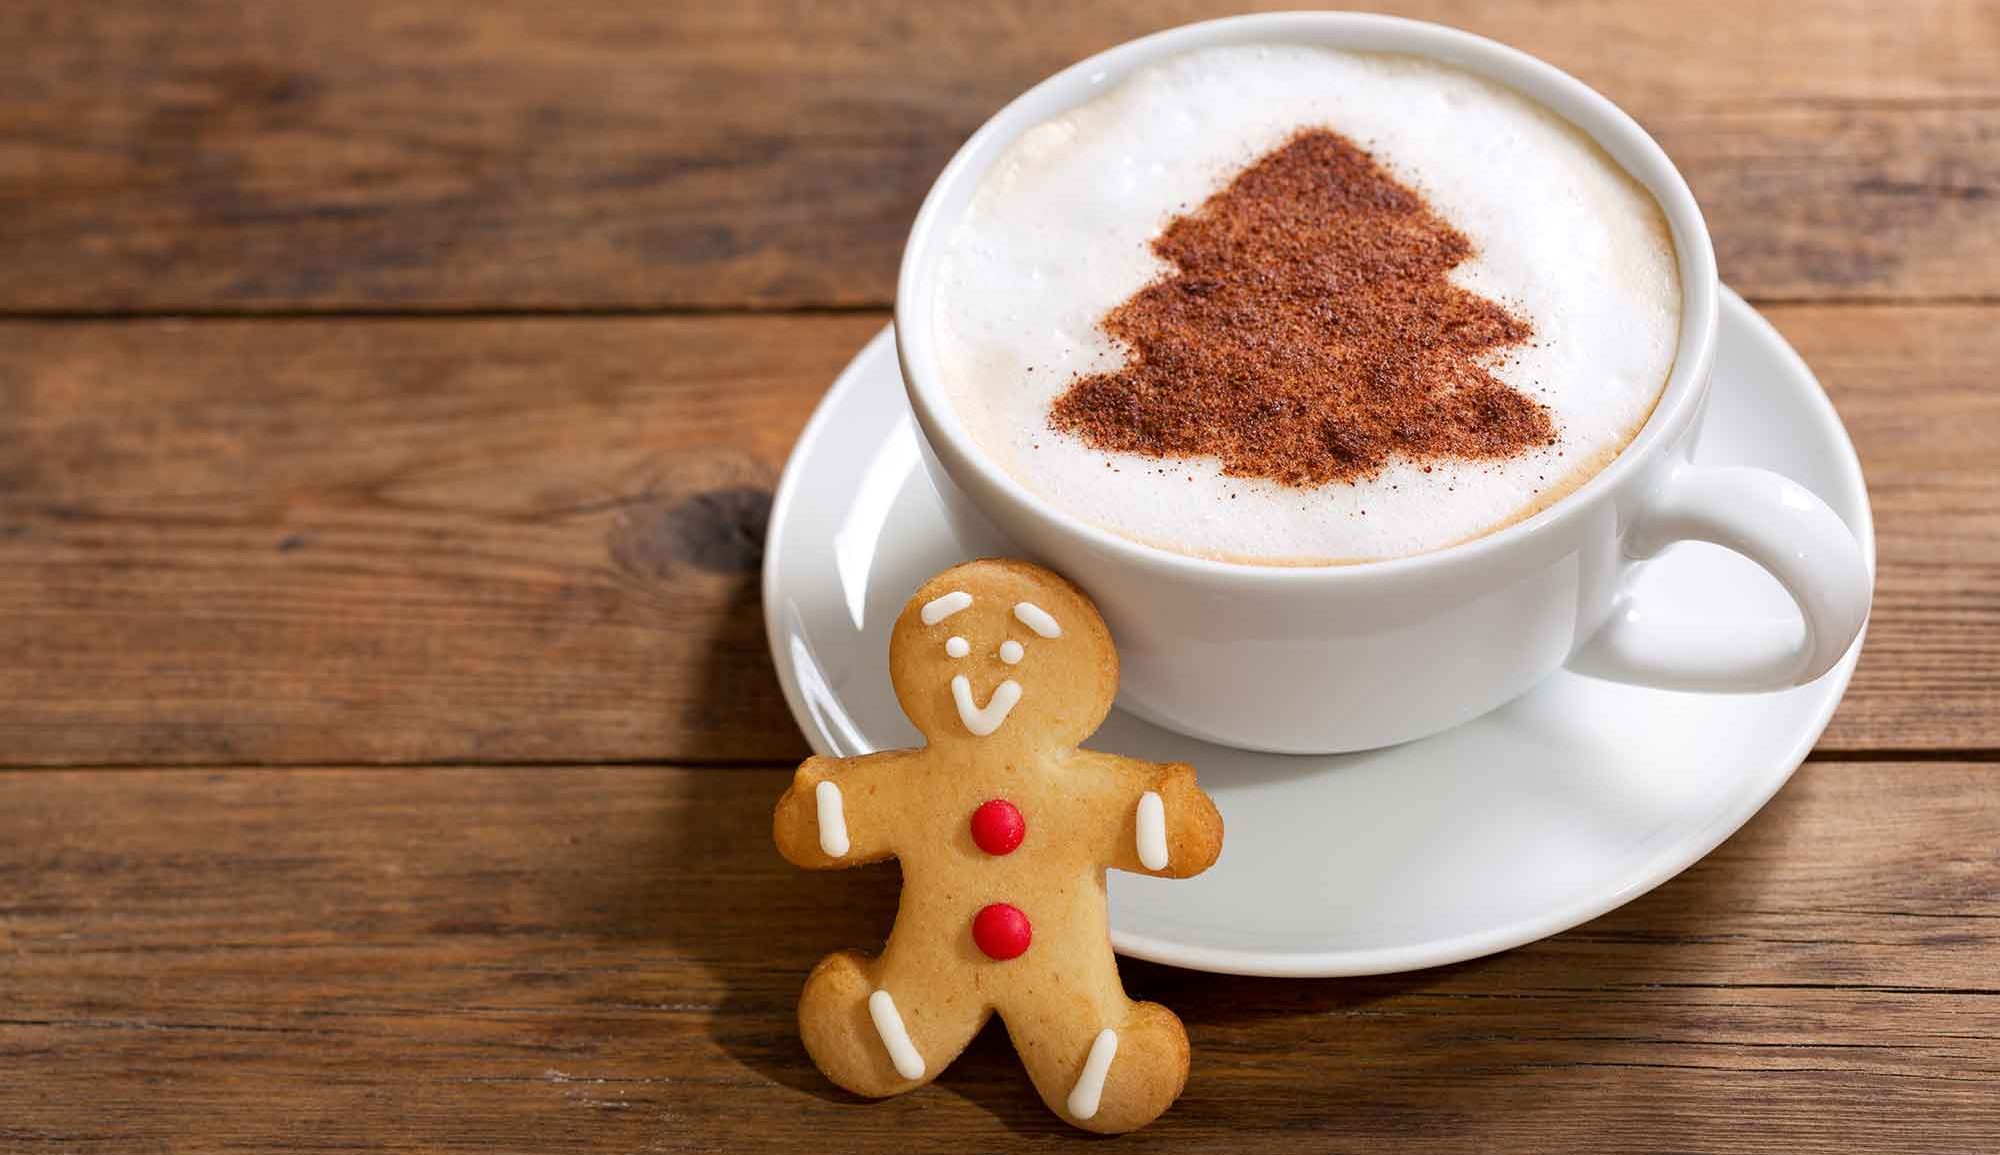 Mydentist has ranked the Christmas drinks with the most sugar in them